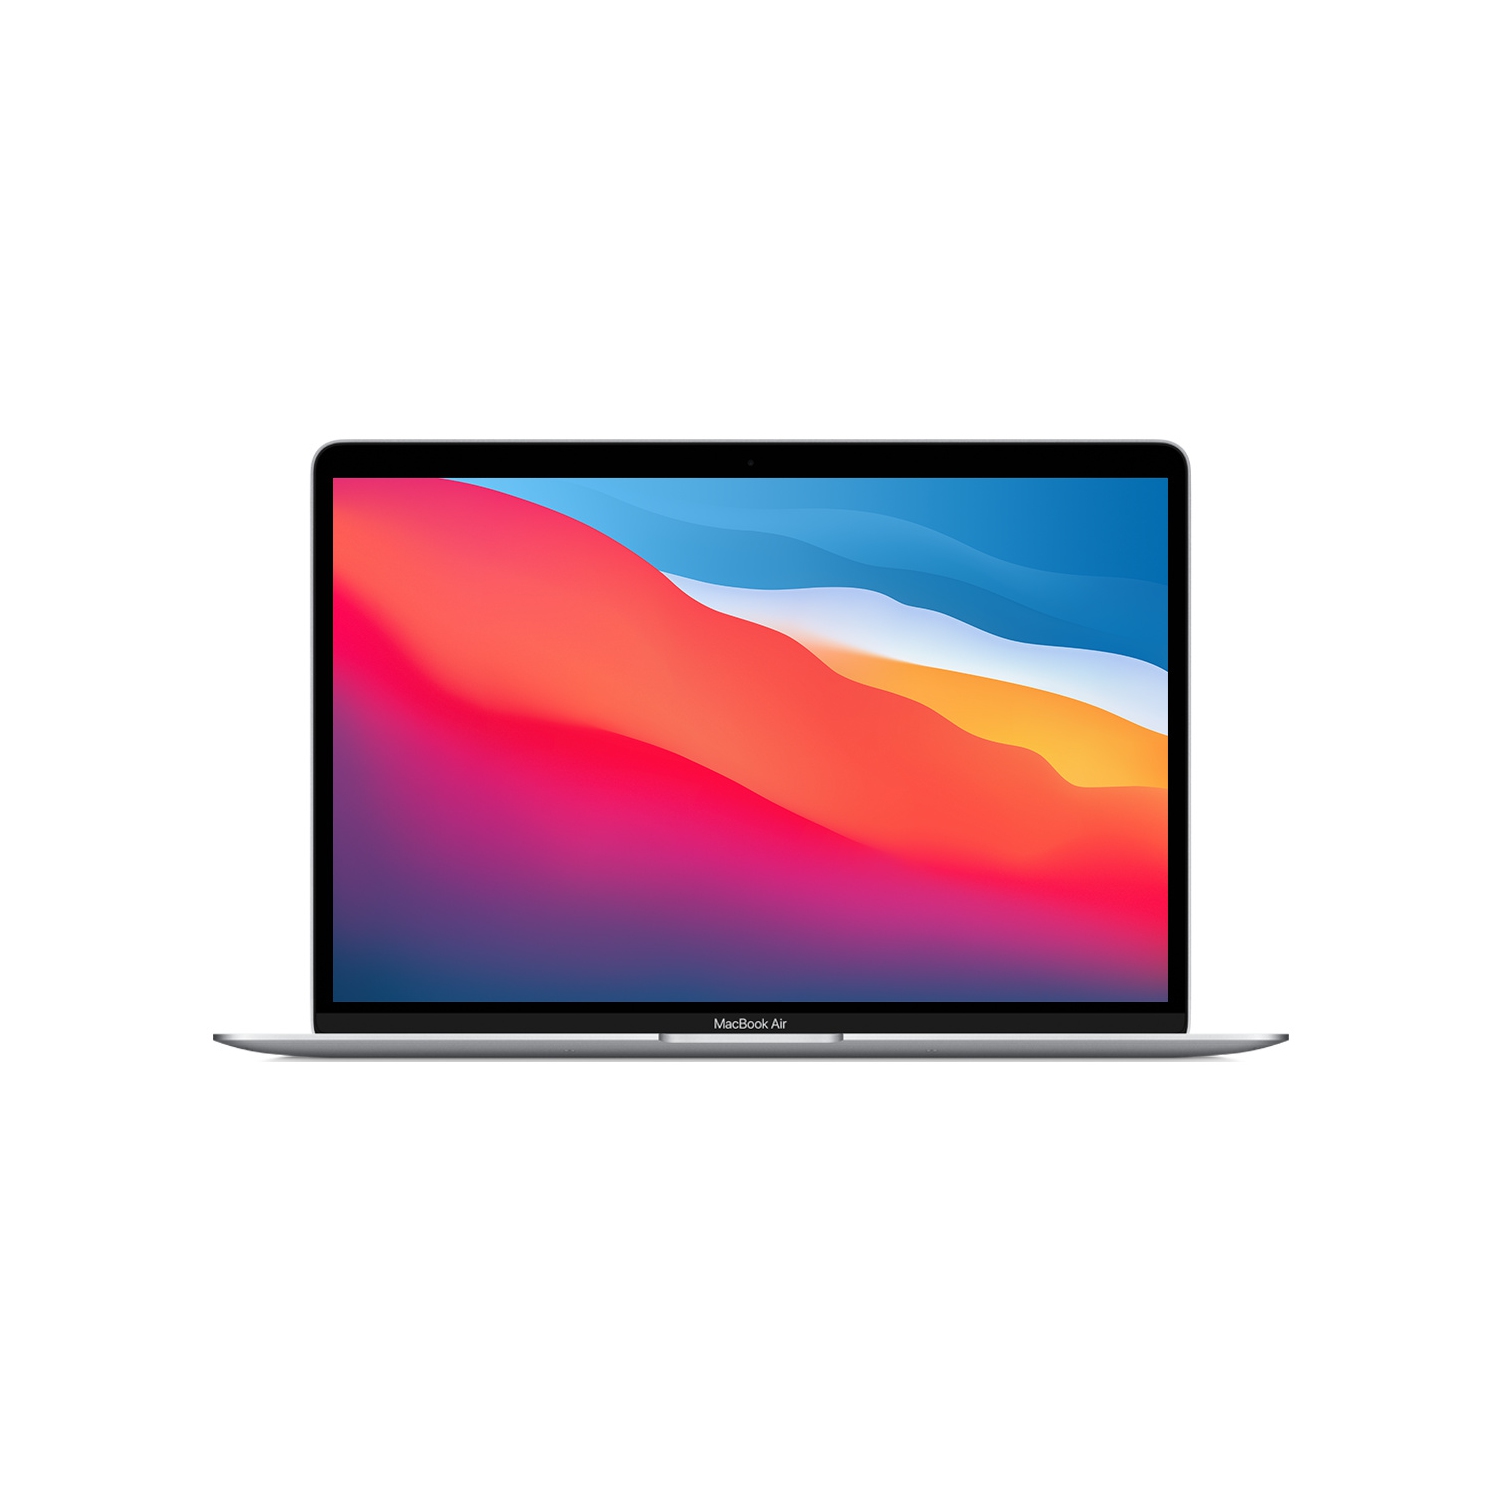 Apple MacBook Air (2020) 13.3” 256GB with M1 Chip, 8 Core